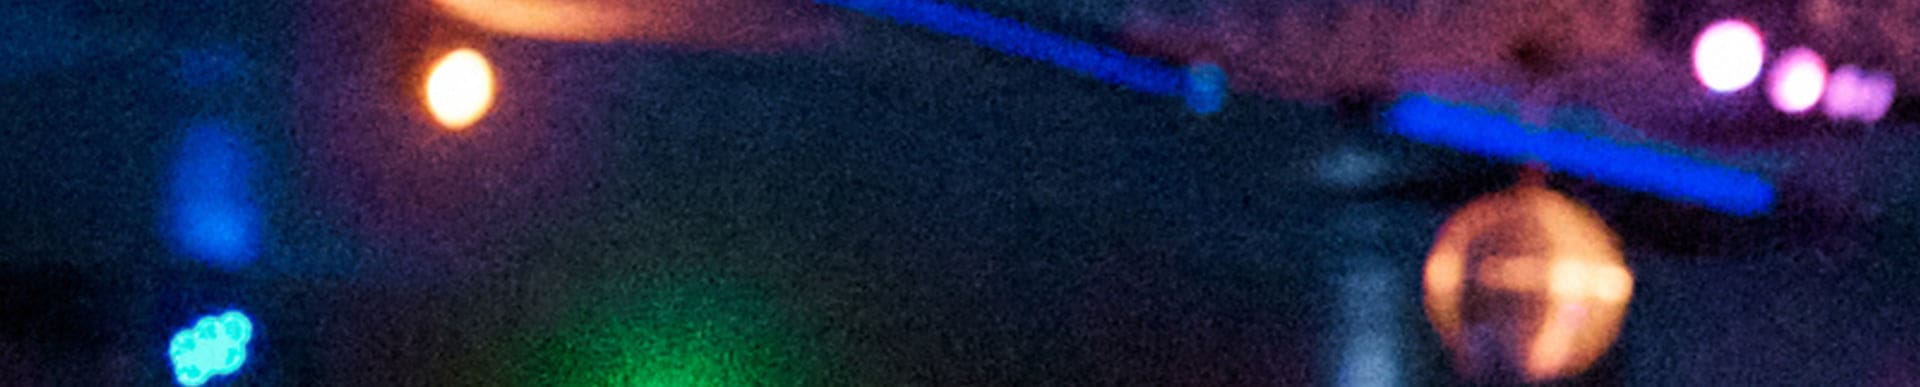 Blurred out background with different colored lights: blue, orange, green, and purple.